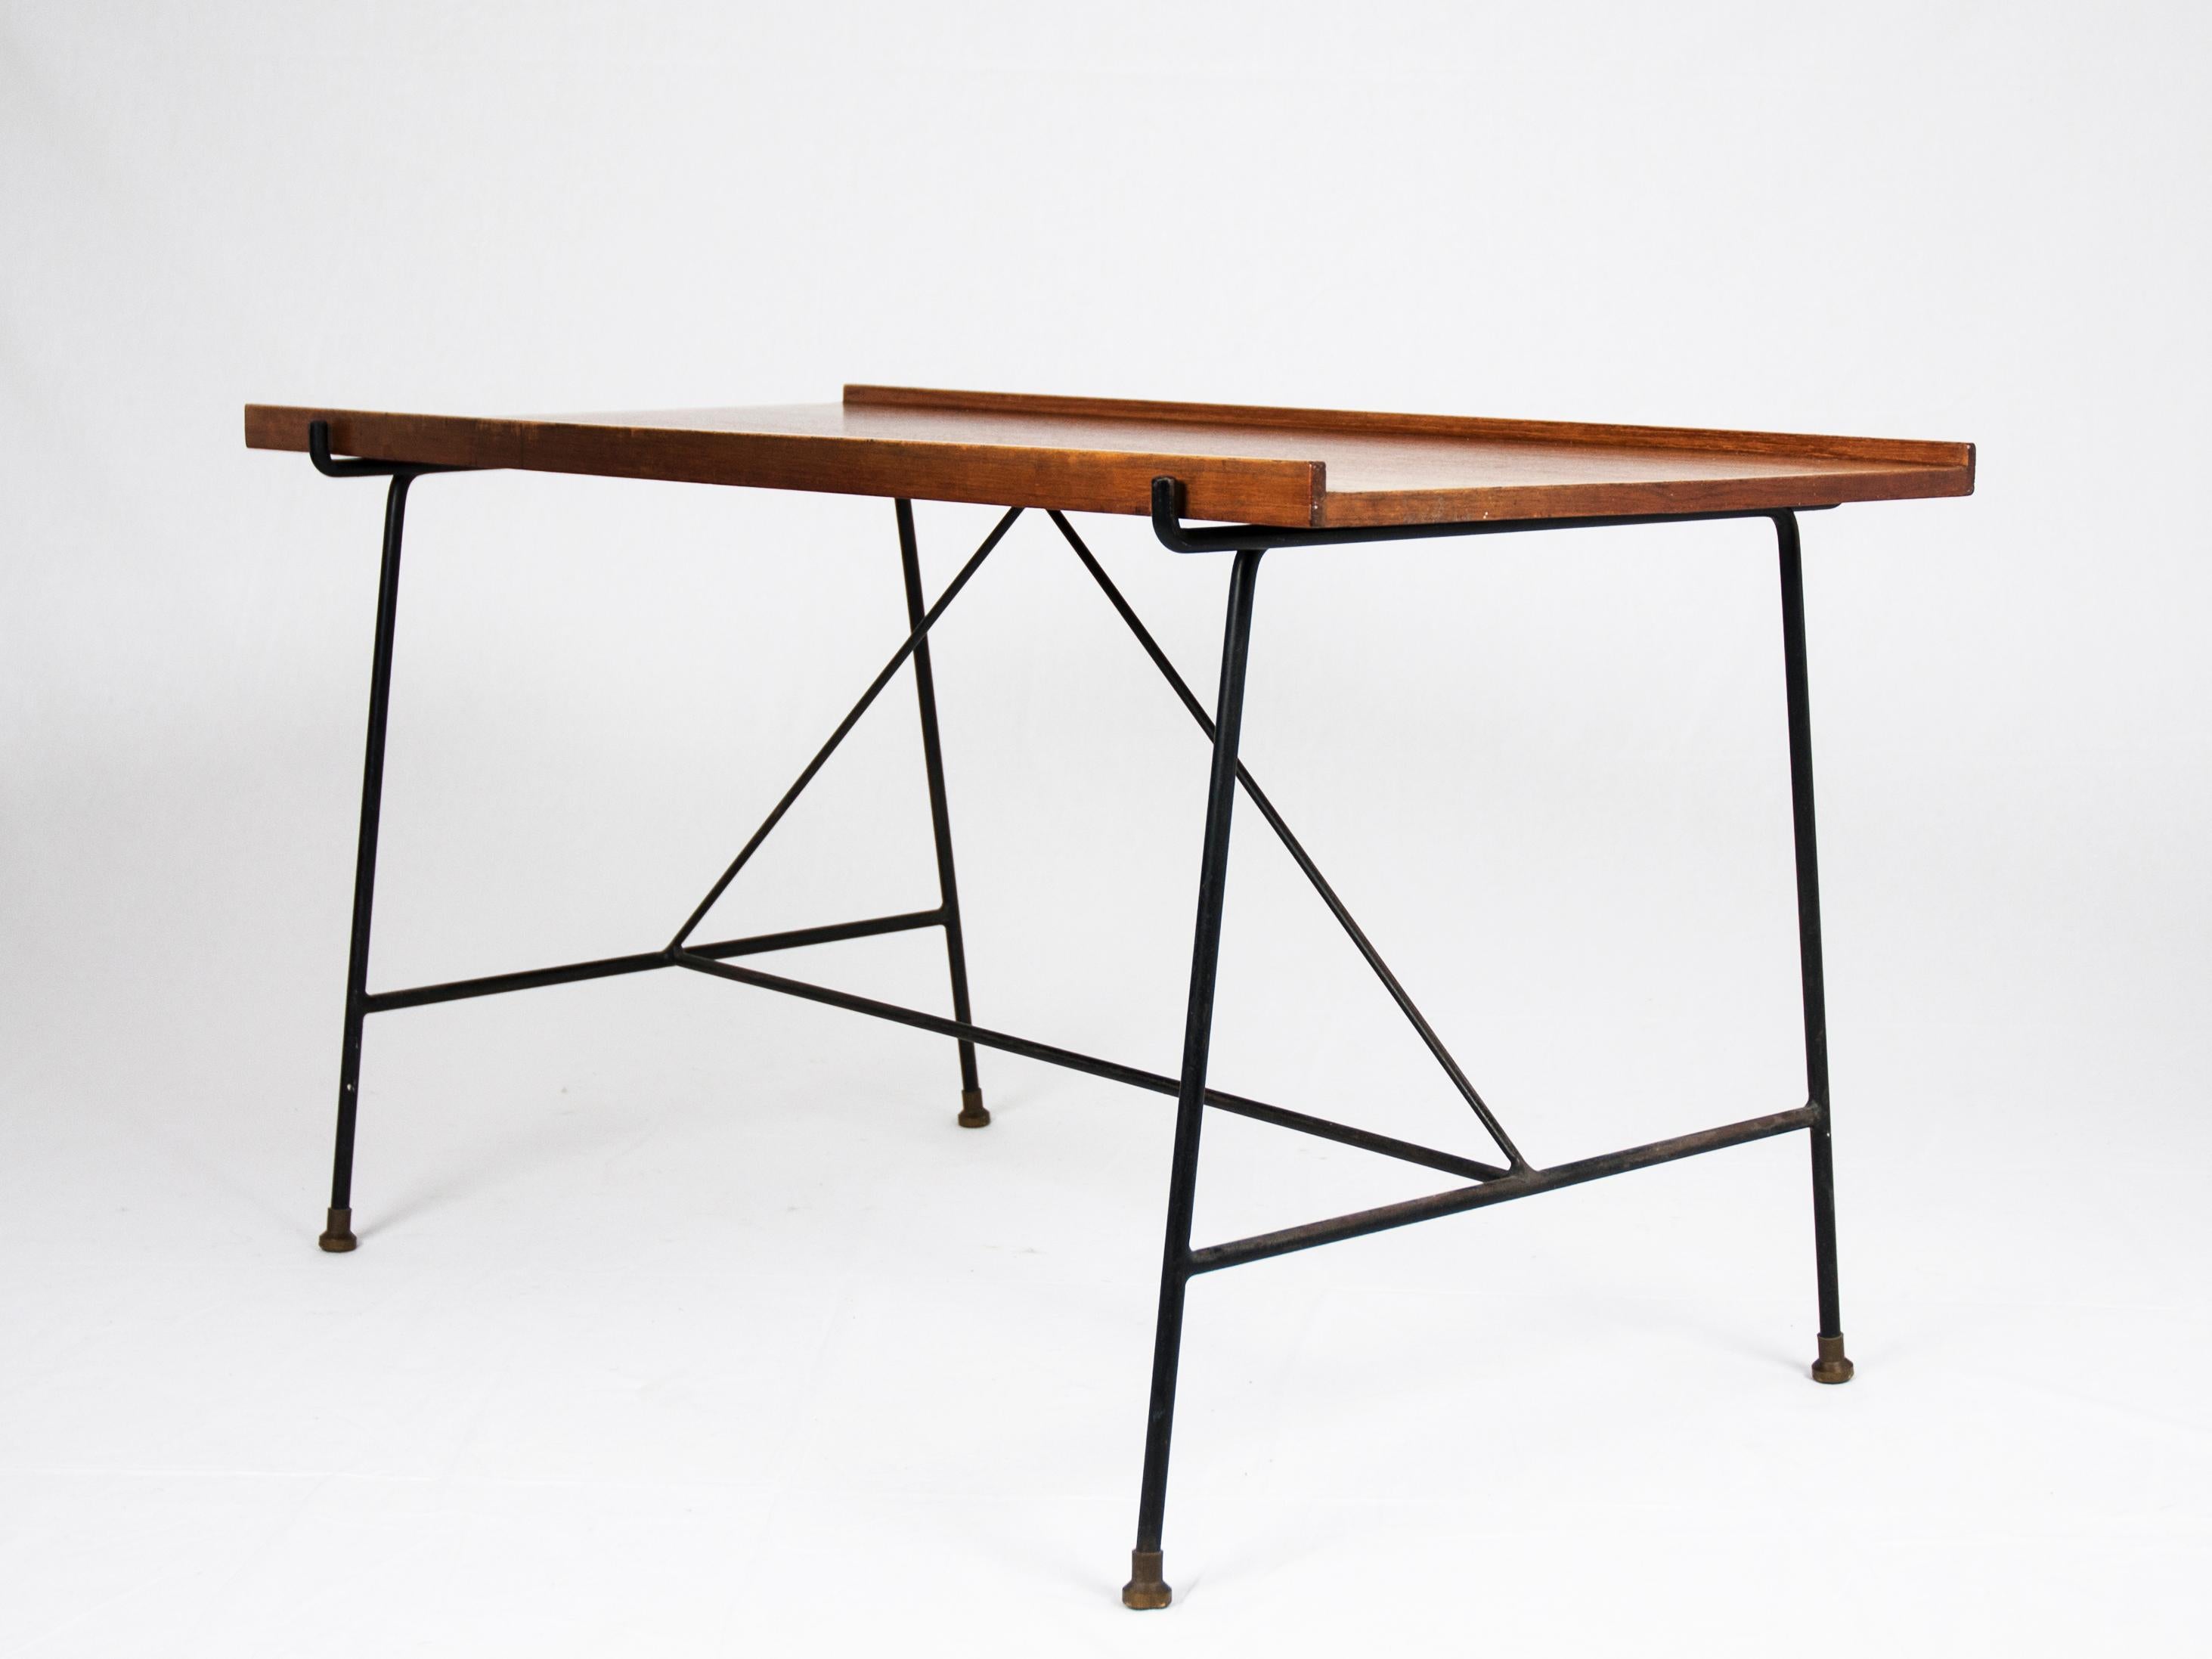 Augusto Bozzi Midcentury Compasso d'Oro Awarded Coffee Table for Saporiti, 1955 In Good Condition For Sale In Milan, Italy